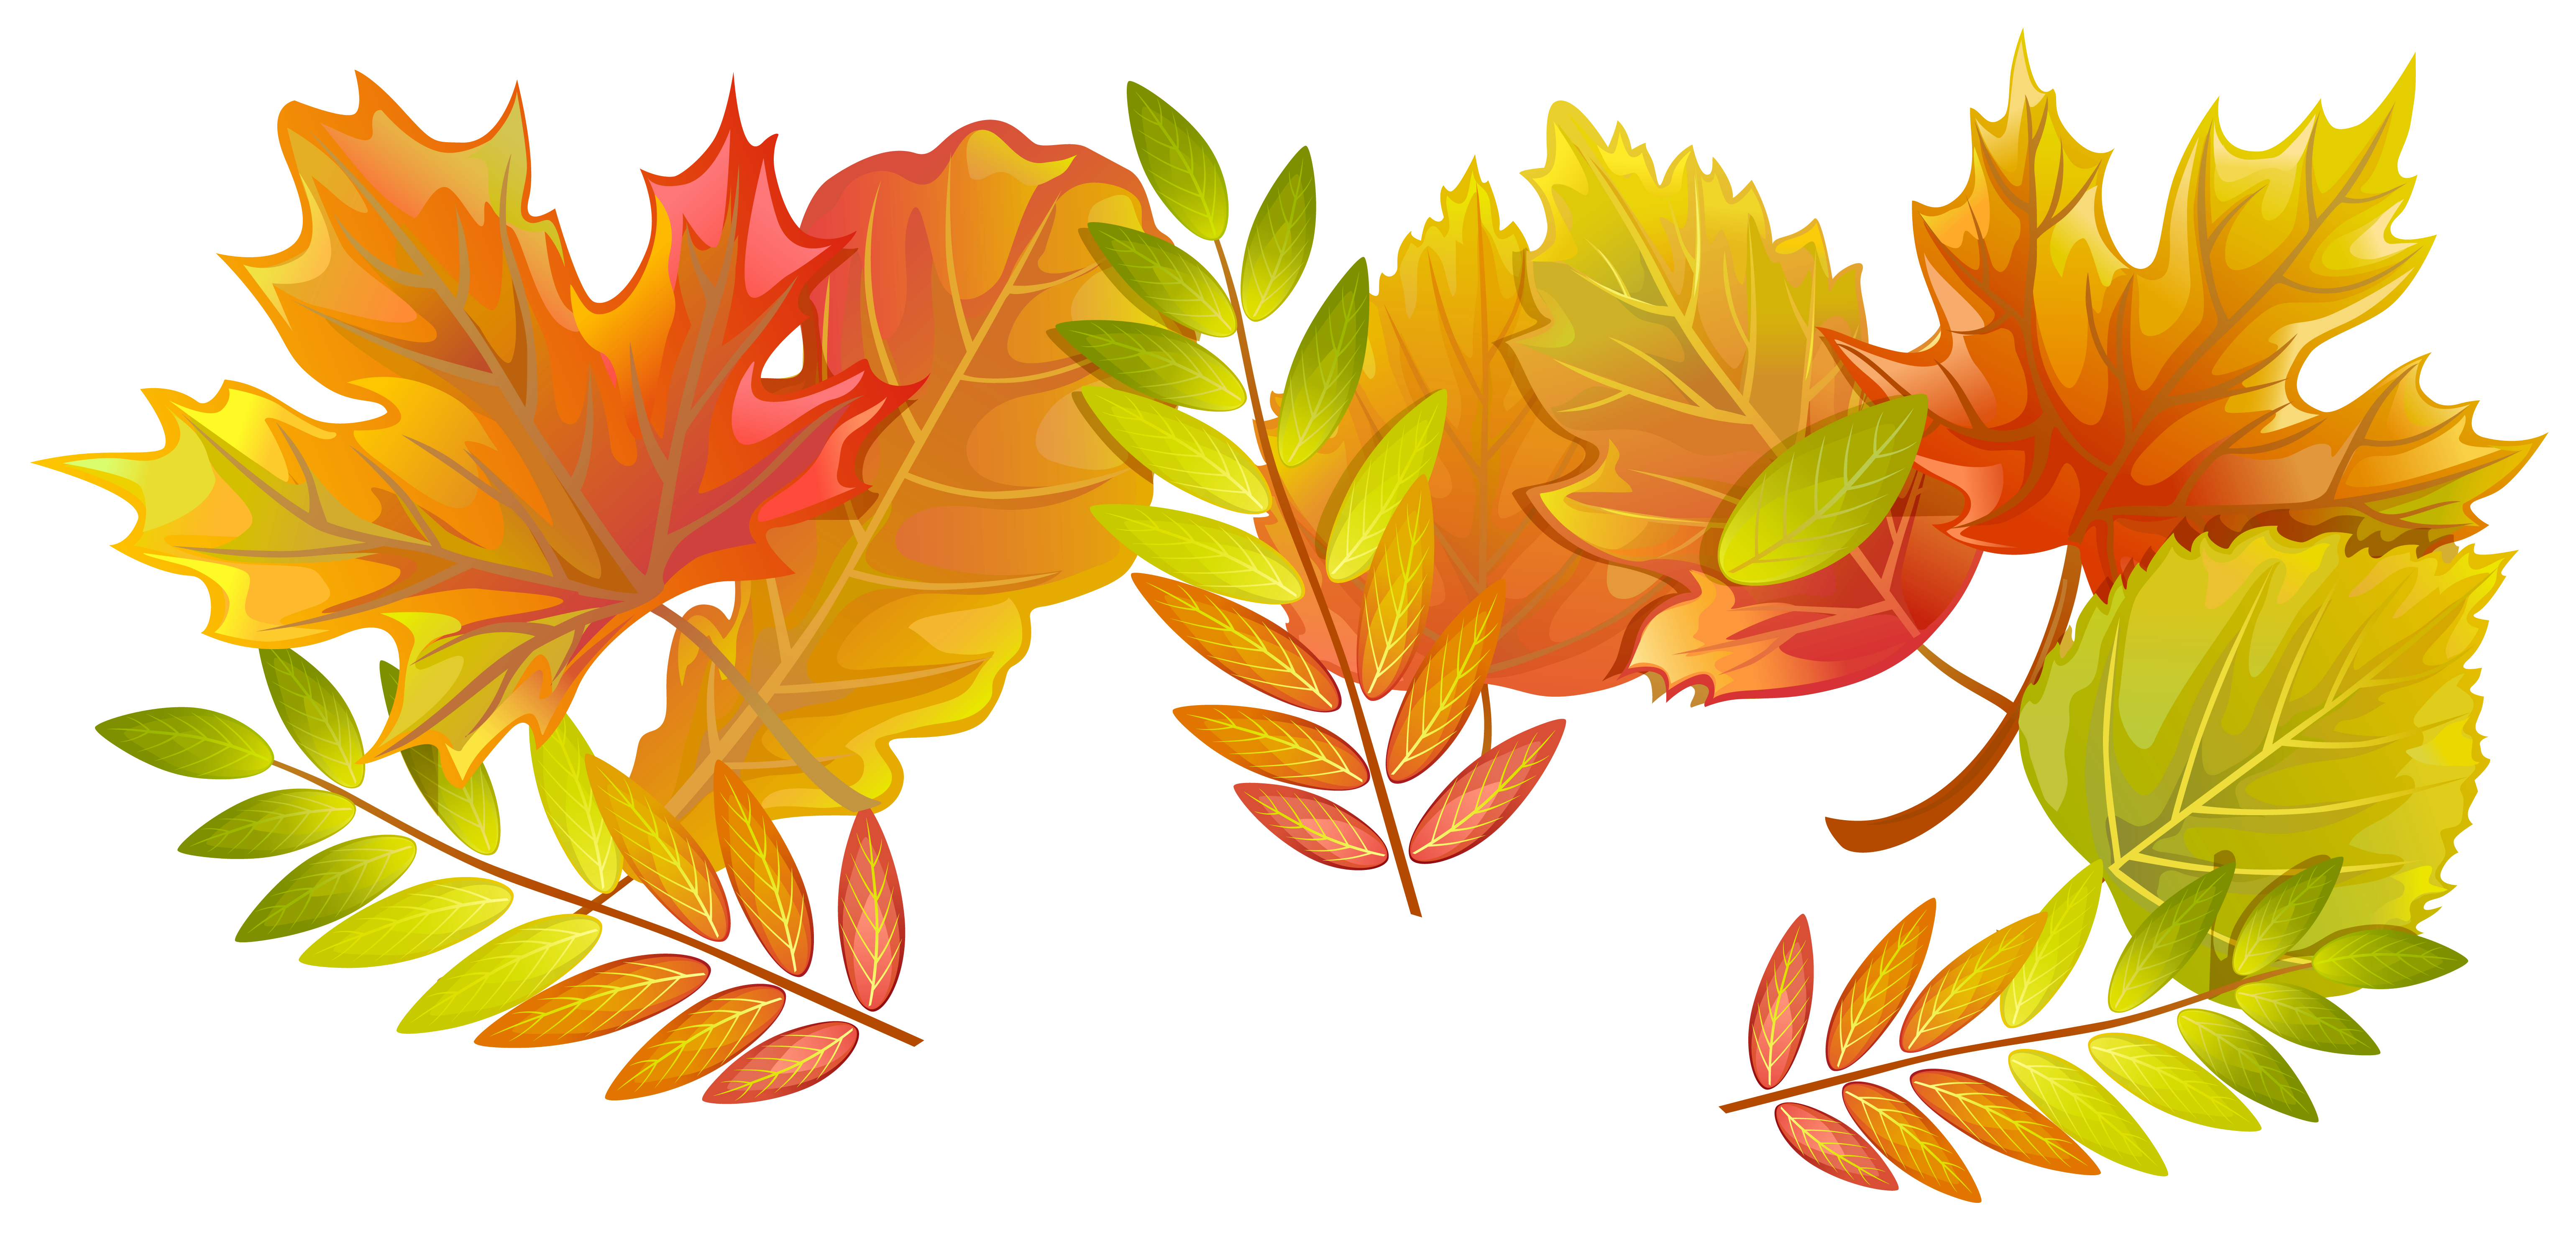 Decorative clipart autumn. Fall leaves png image